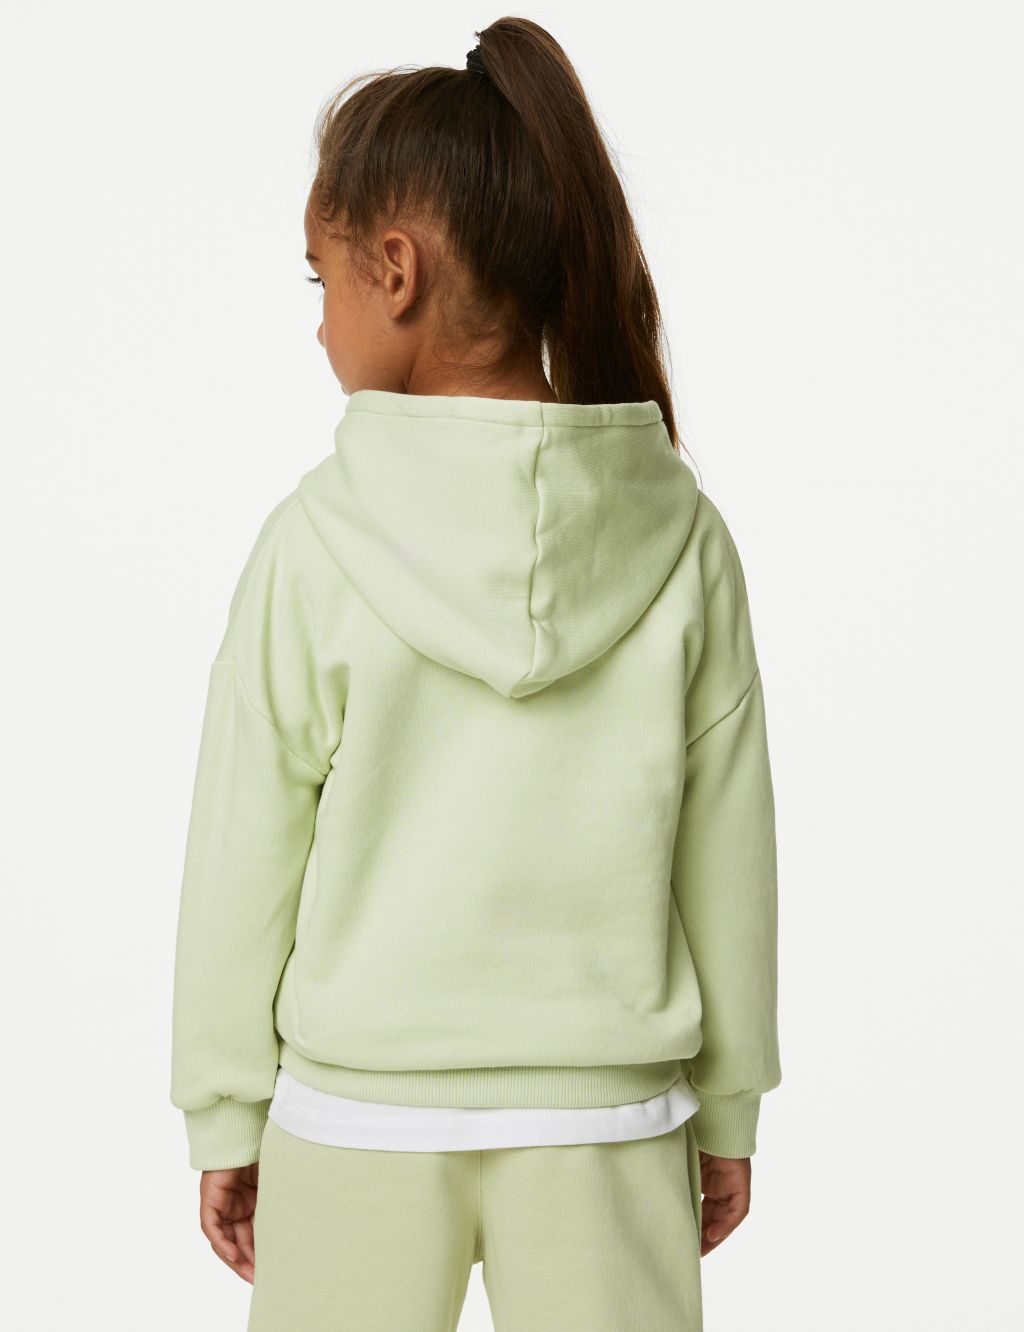 Girls Hoodie & Joggers Outfit image 3